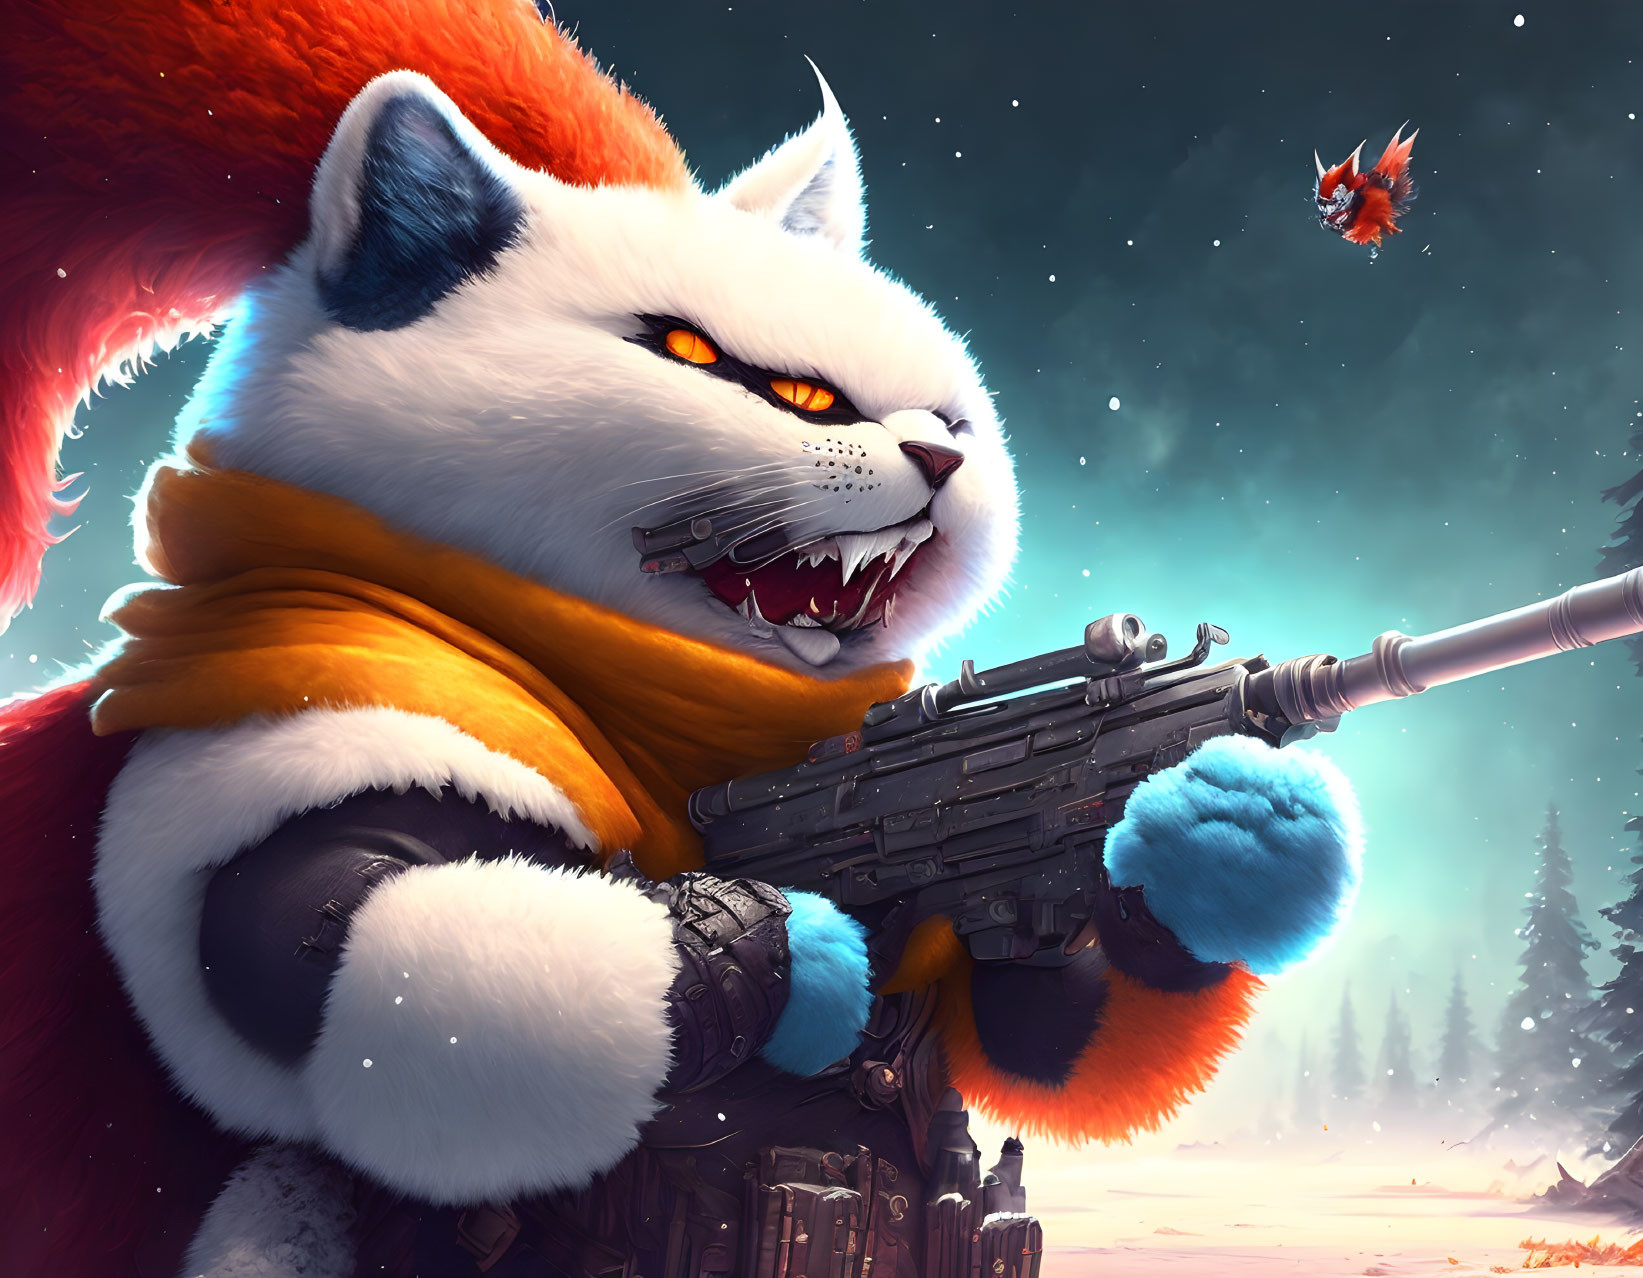 Anthropomorphic warrior cat with rifle, armor, scarf, and bird companion under night sky